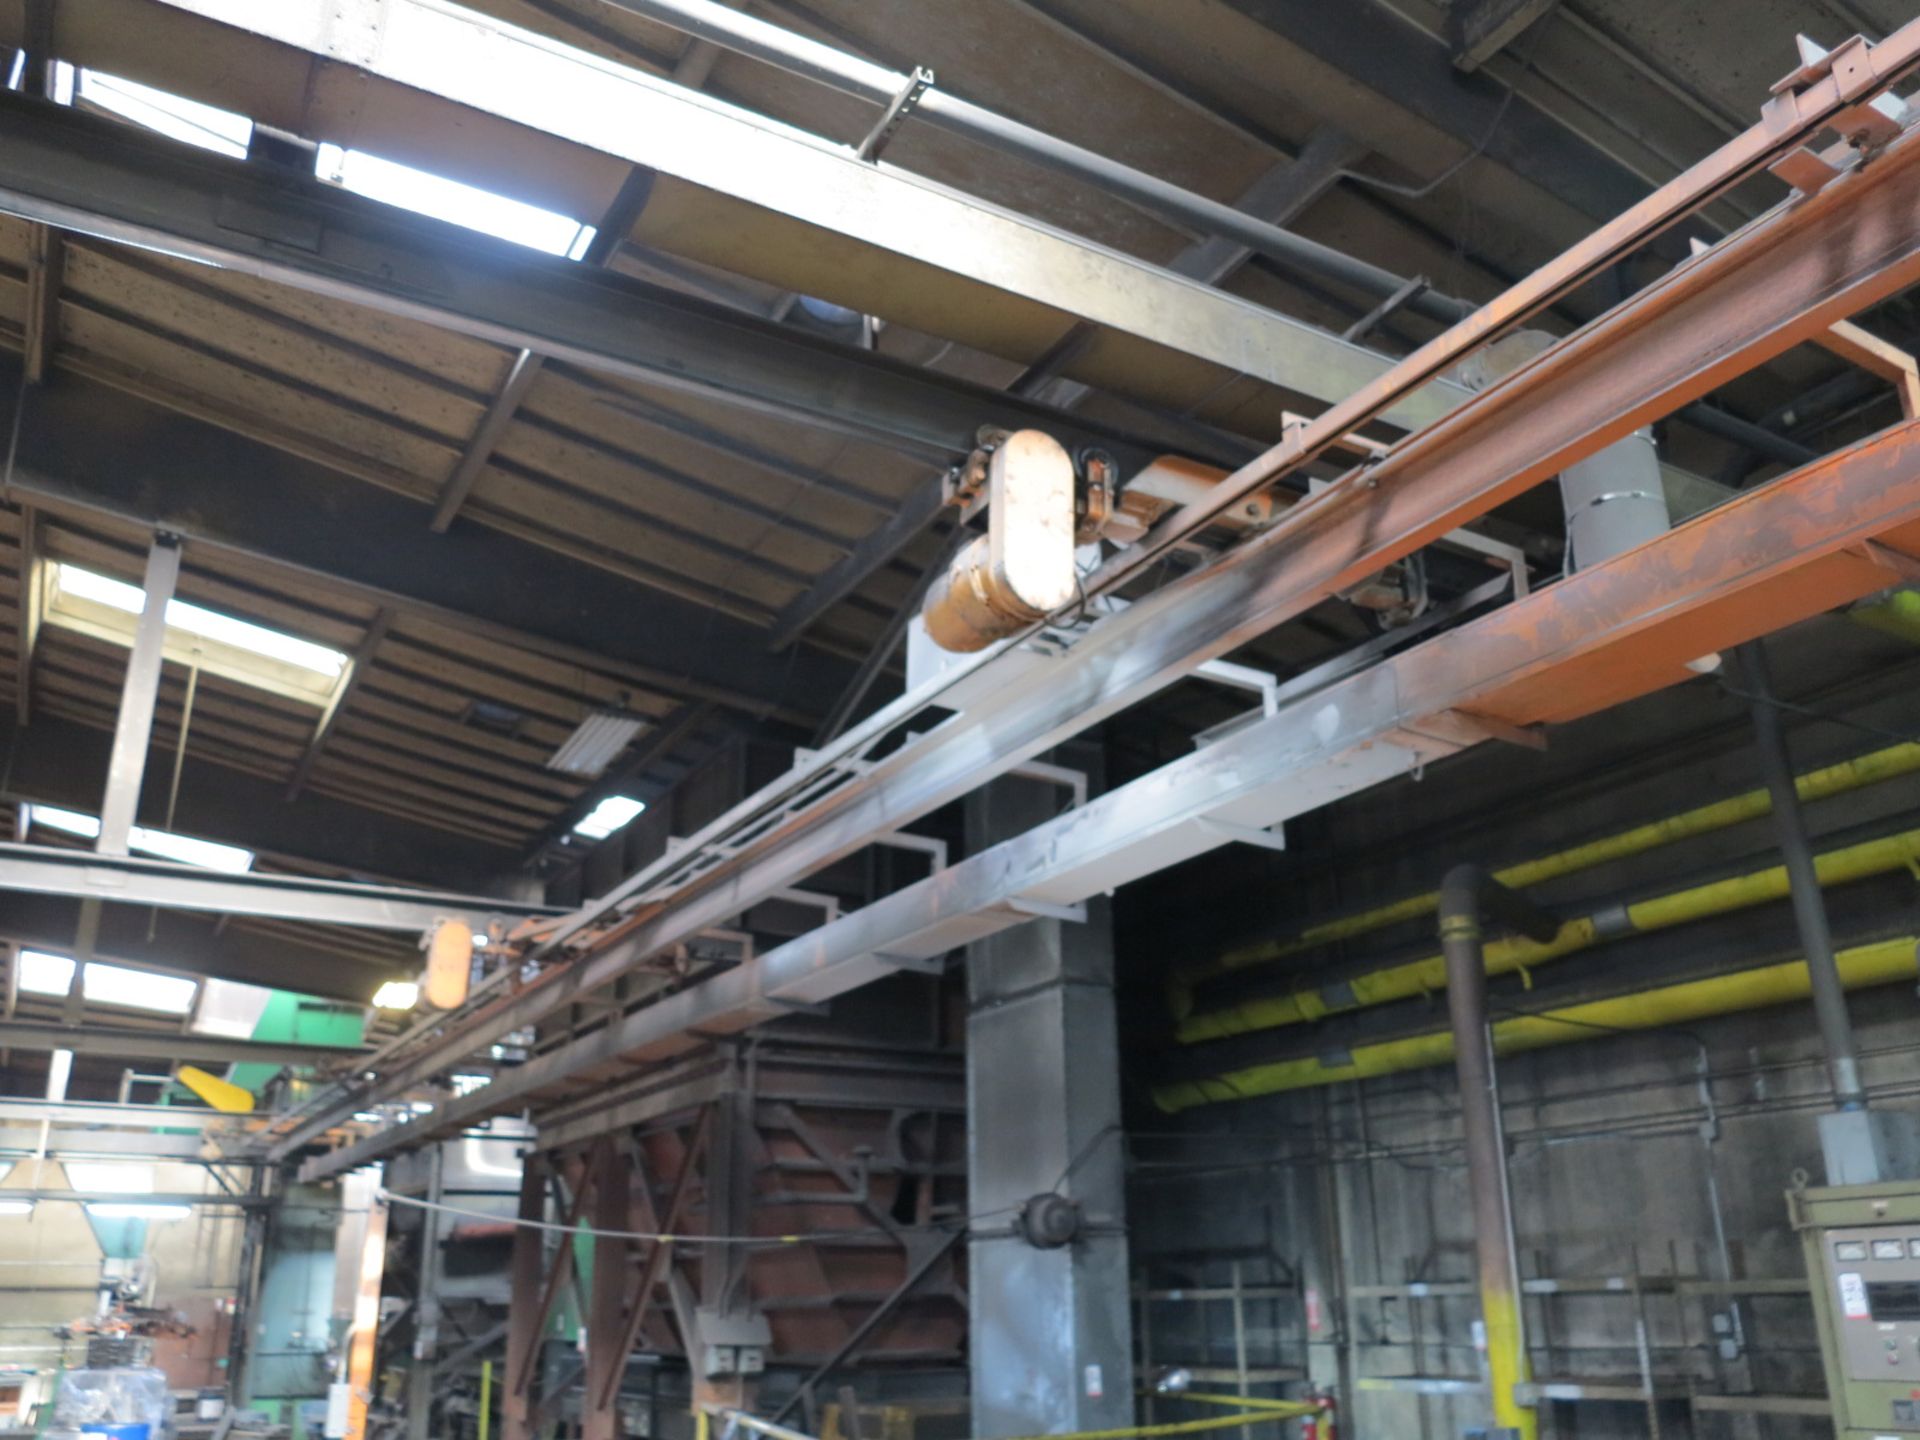 OVERHEAD CRANE SYSTEM W/ DUST COLLECTION/EXHAUST SYSTEM, APPROX. 120' SPAN, TRAVELS APPROX. 45' - Image 2 of 6